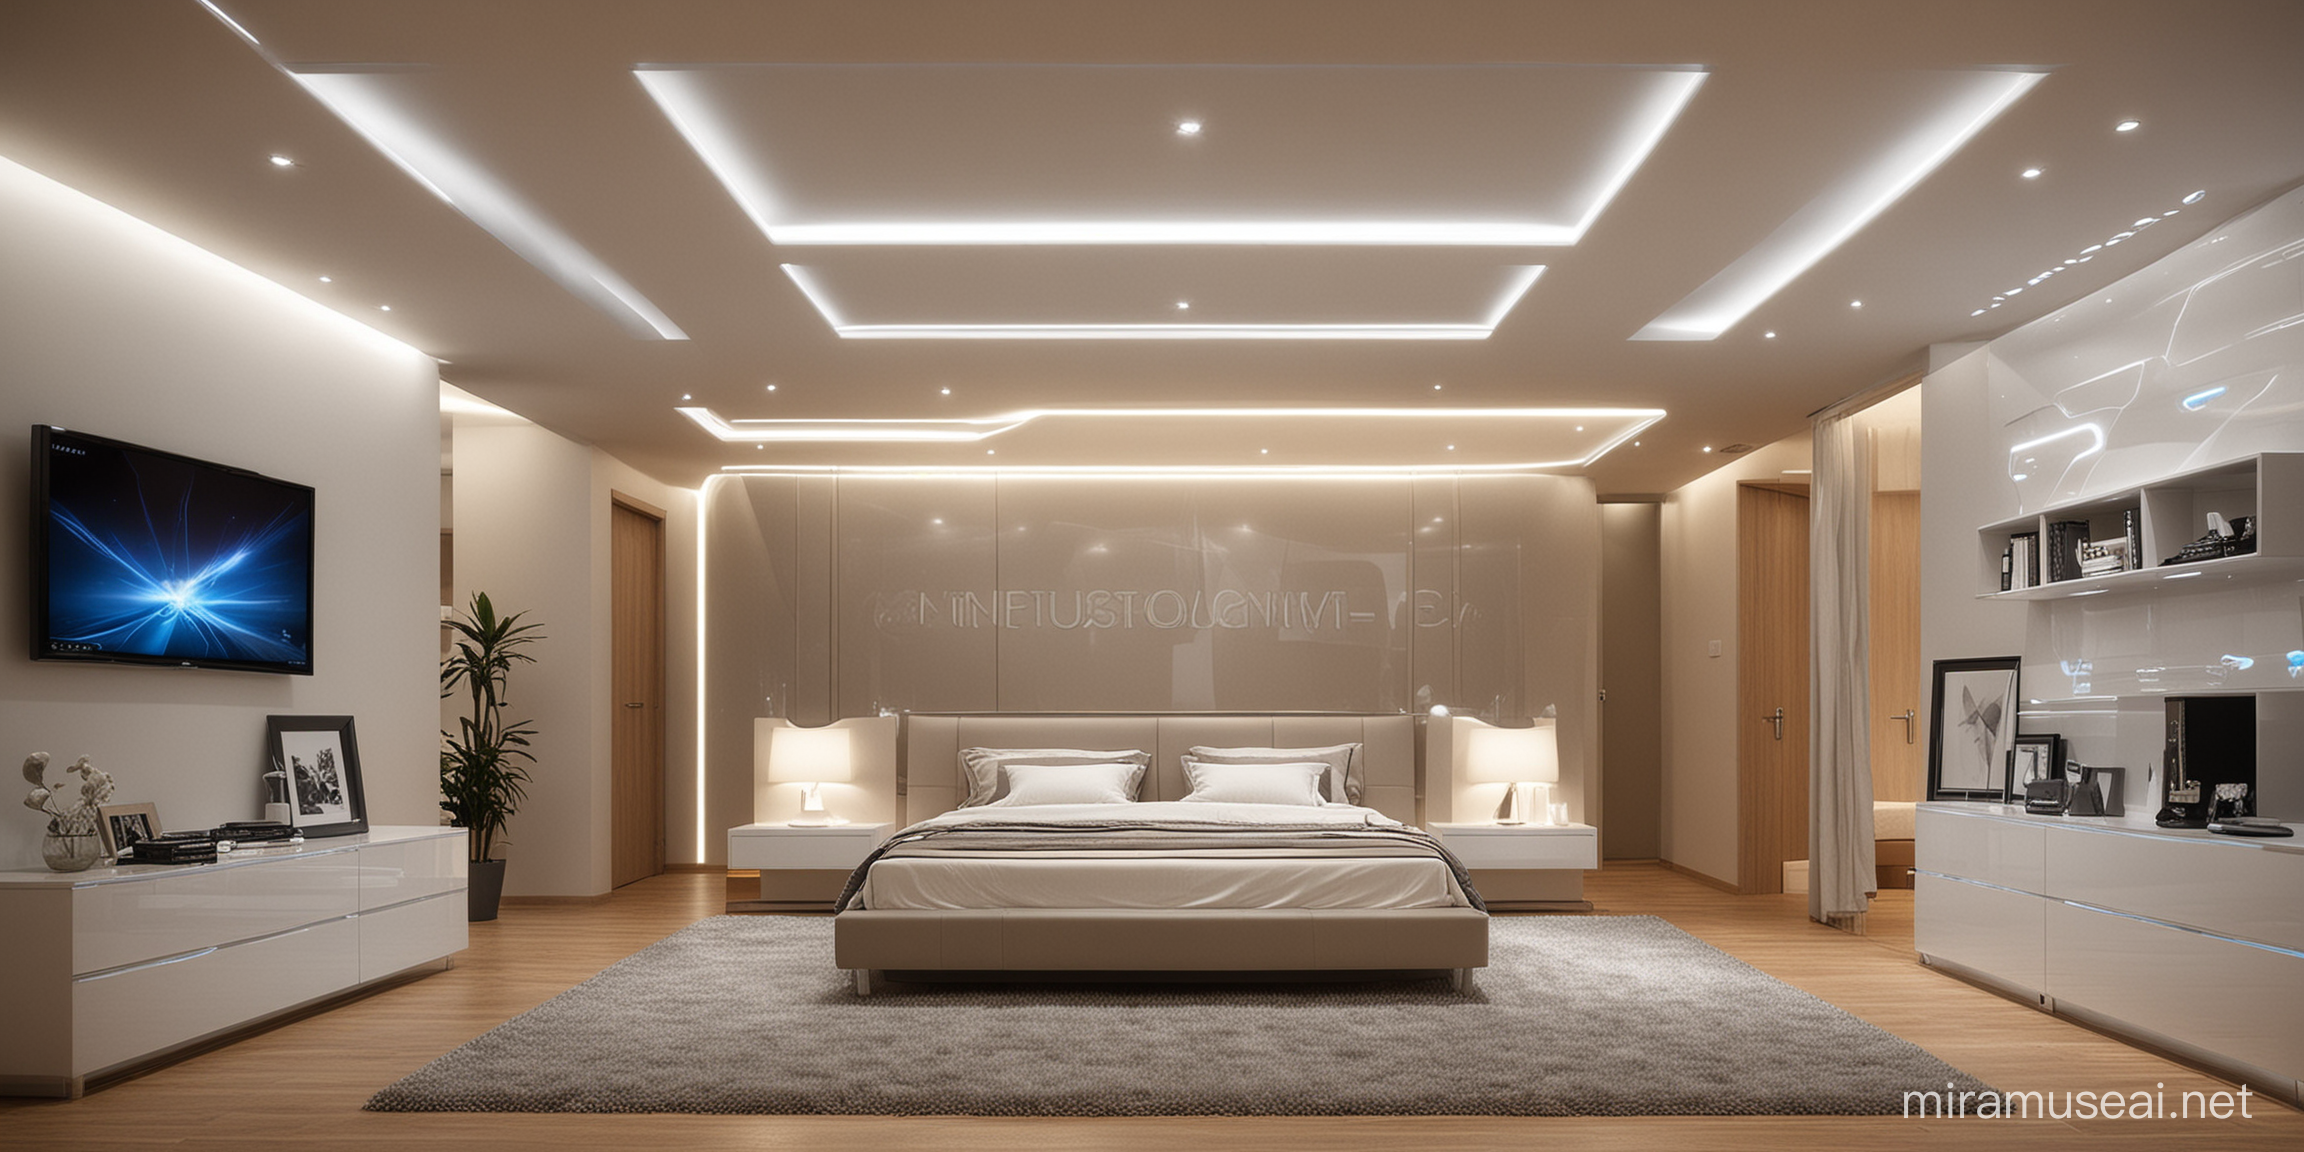 Interious , futuristic style , bedroom , led celling light

